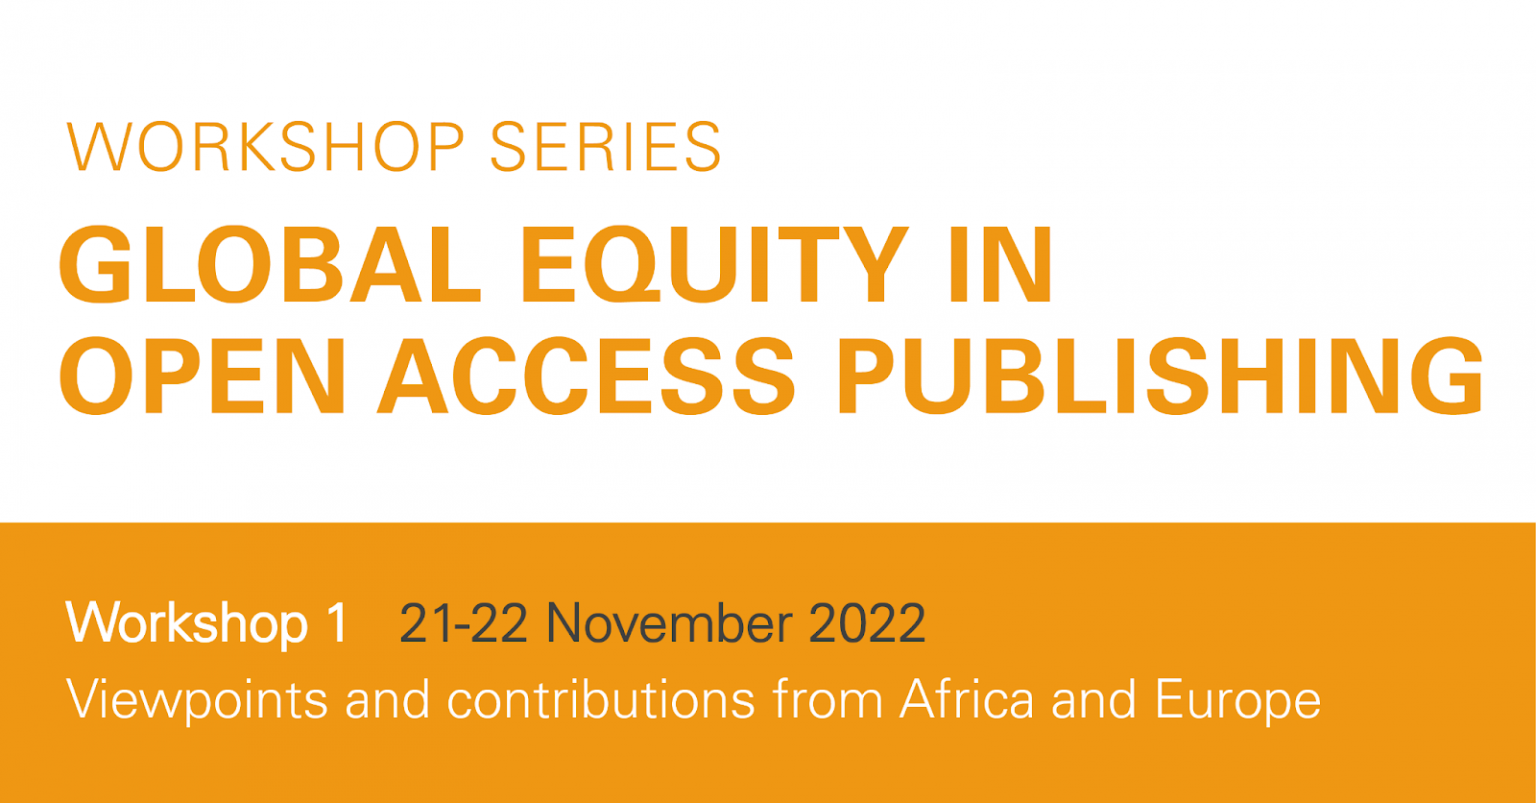 Global equity in open access publishing